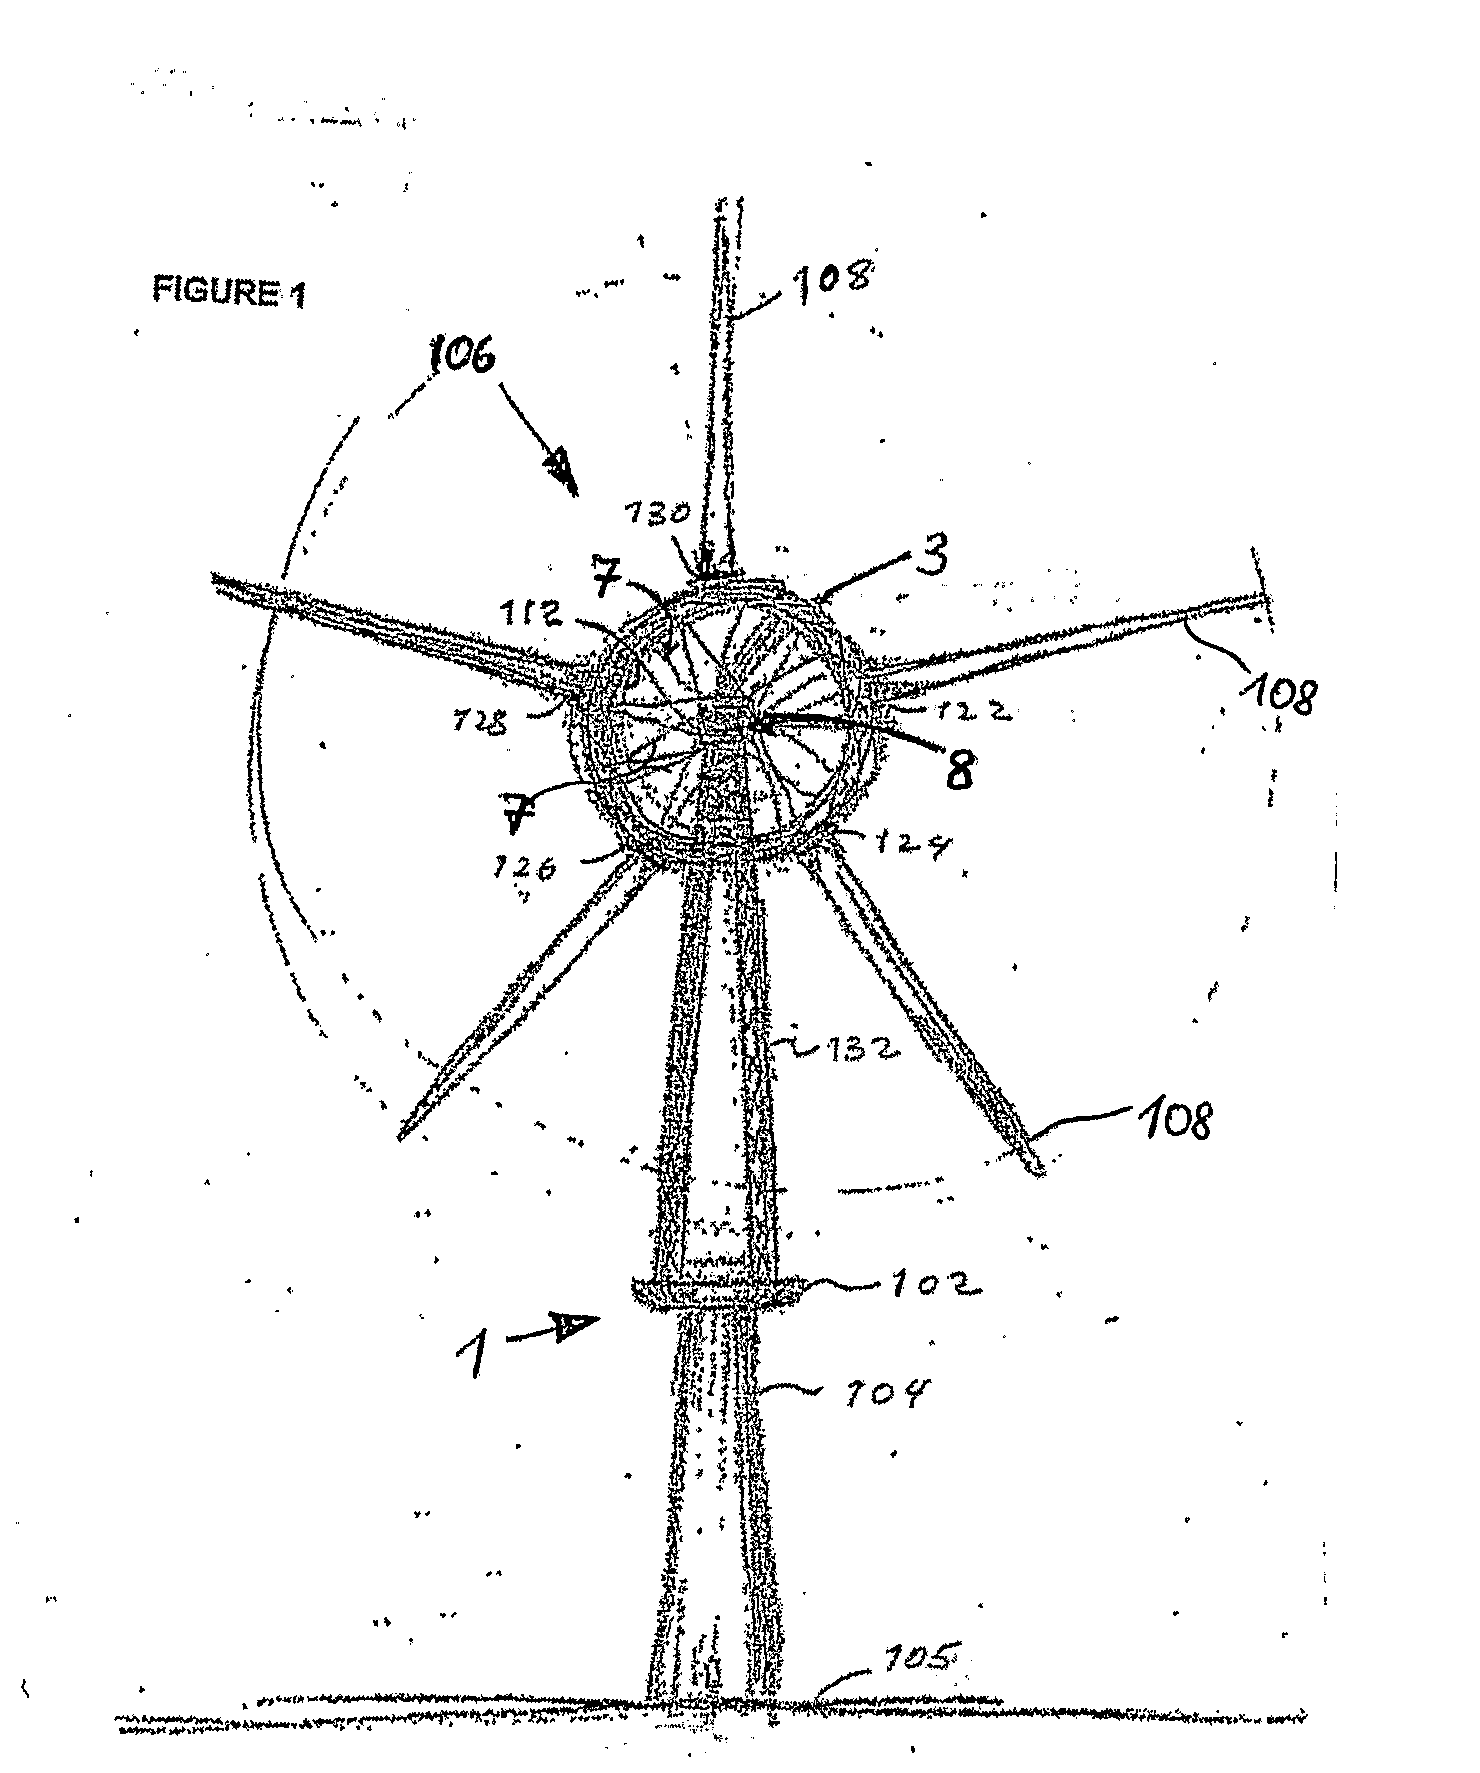 Tension Wheel Hub in a Rotor System for Wind and Water Turbines